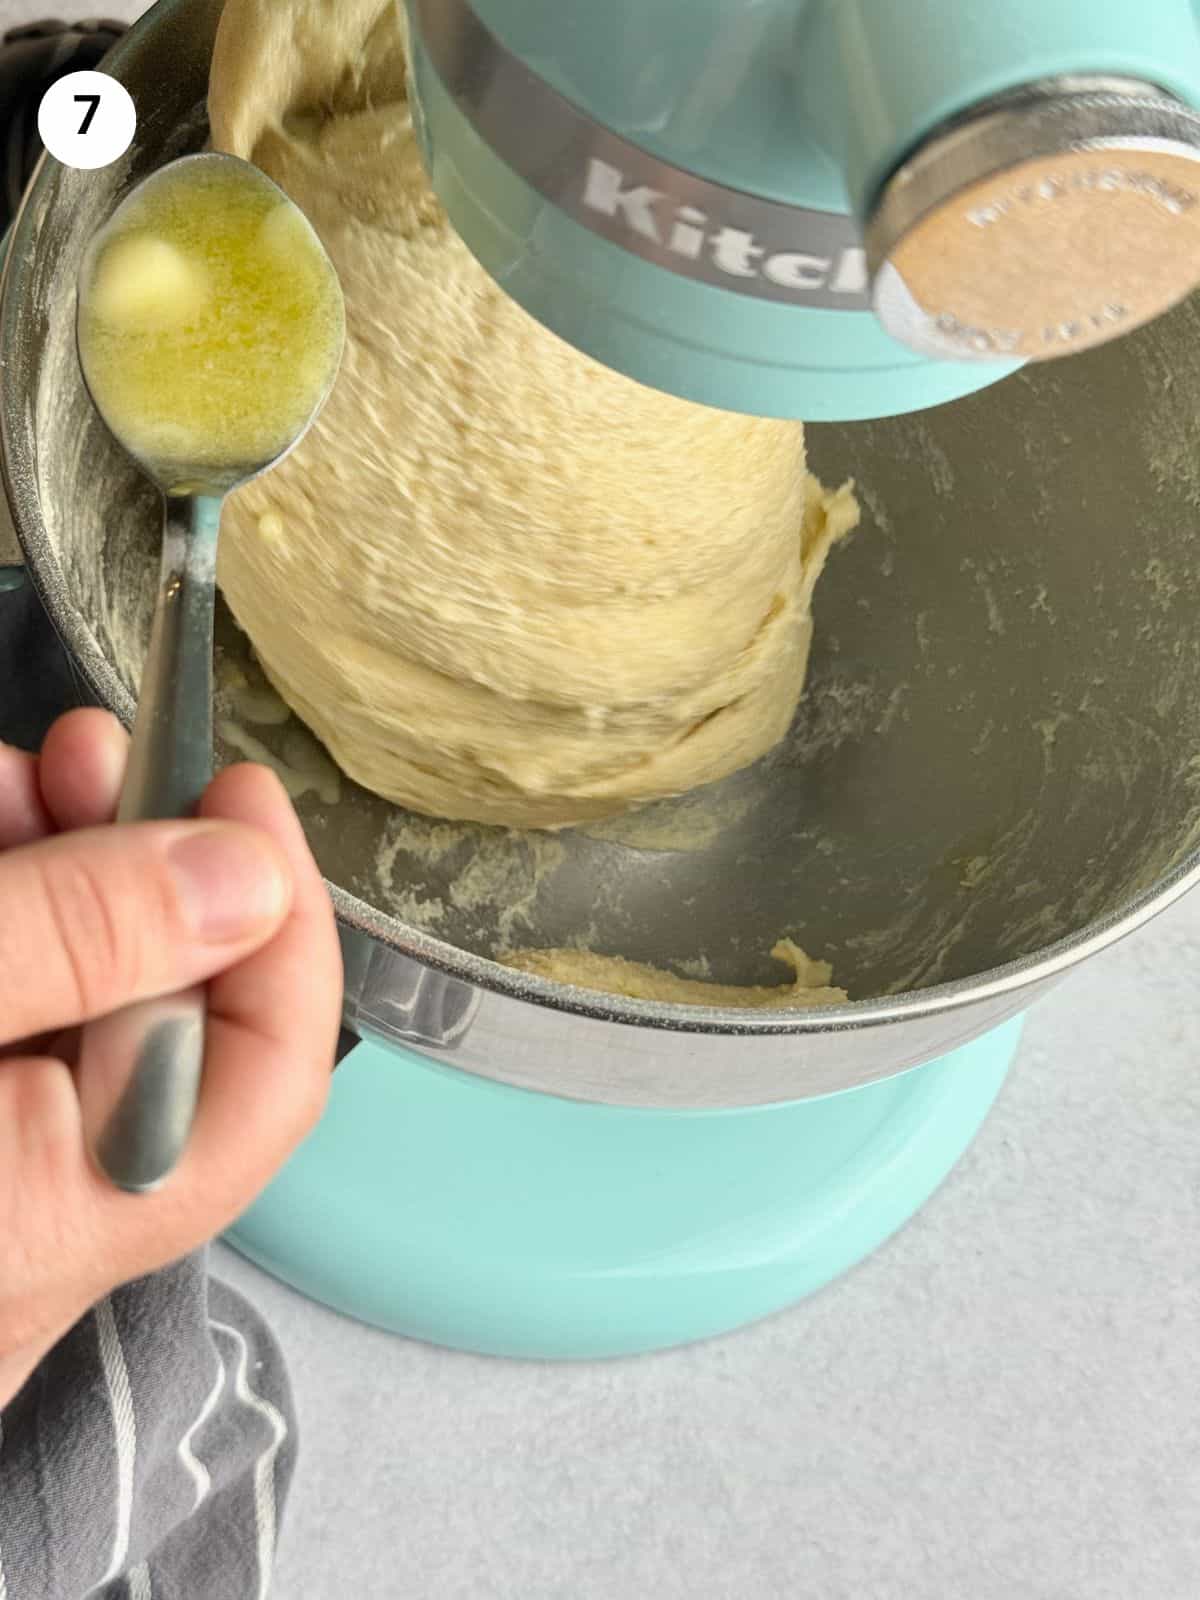 Adding the butter spoon by spoon.